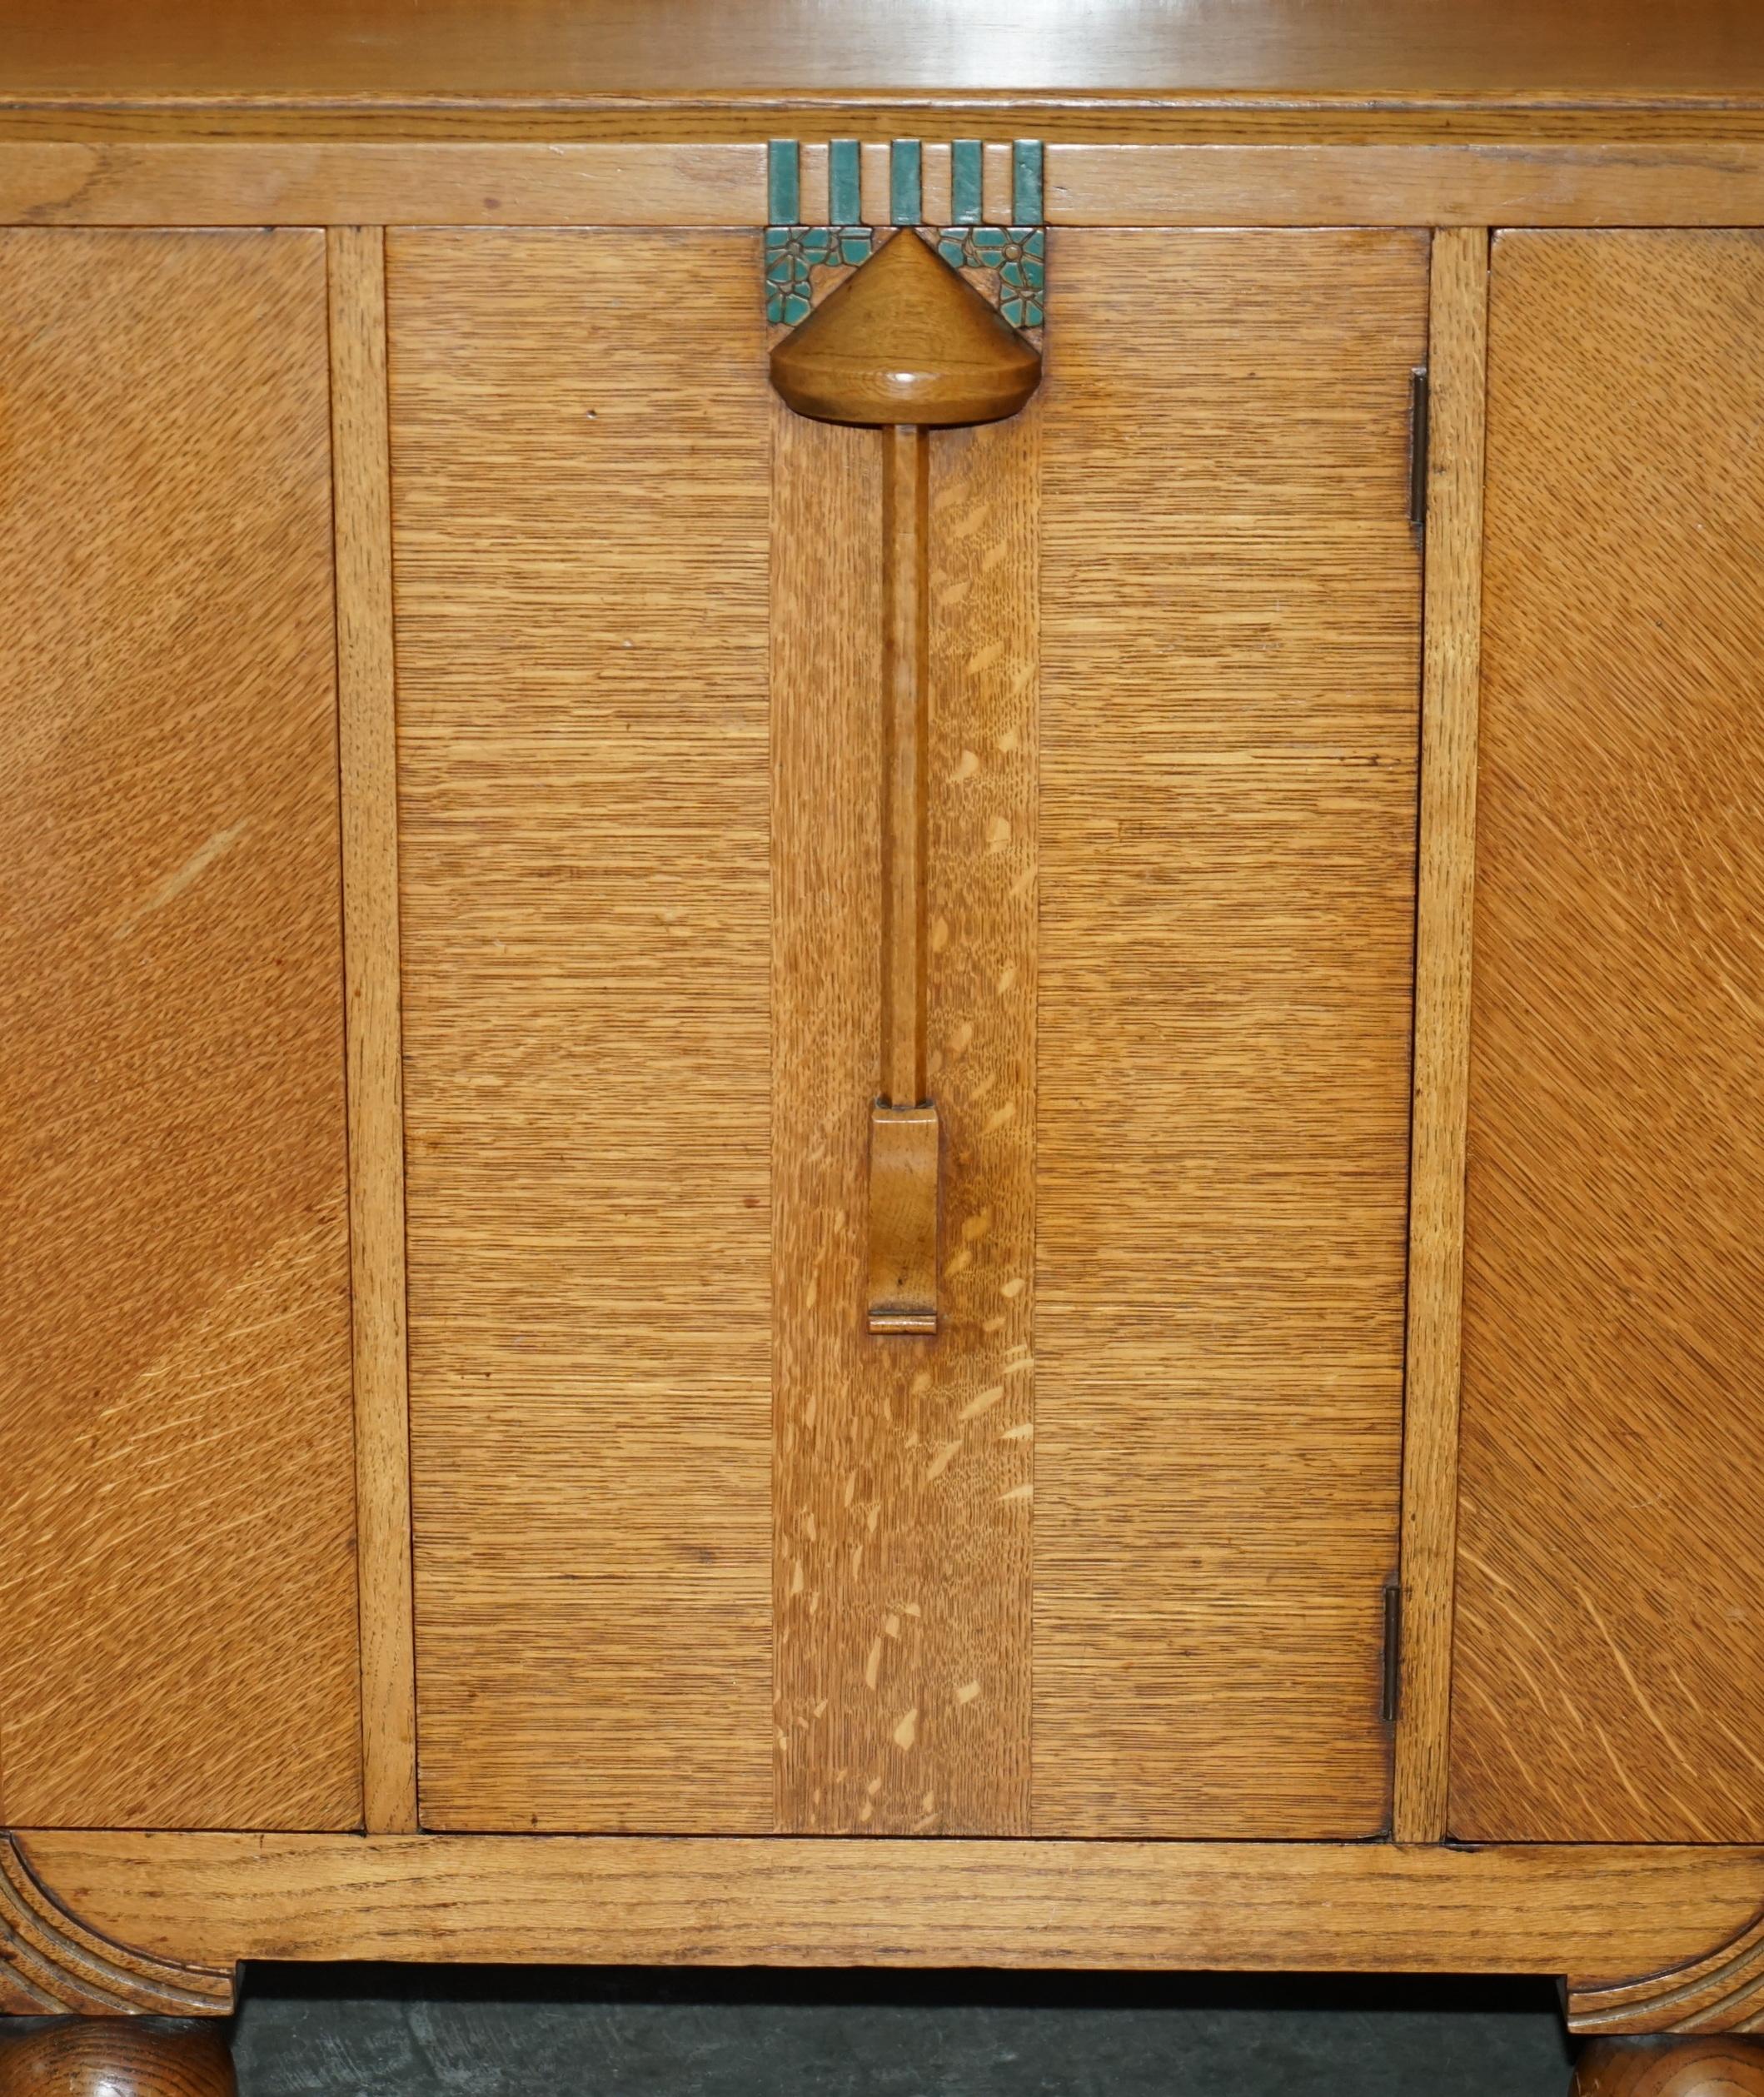 FINE LIBERTY'S COTSWOLD ART DECO OAK CARVED SiDEBOARD CIRCA 1920 PART OF A SUITE im Angebot 1